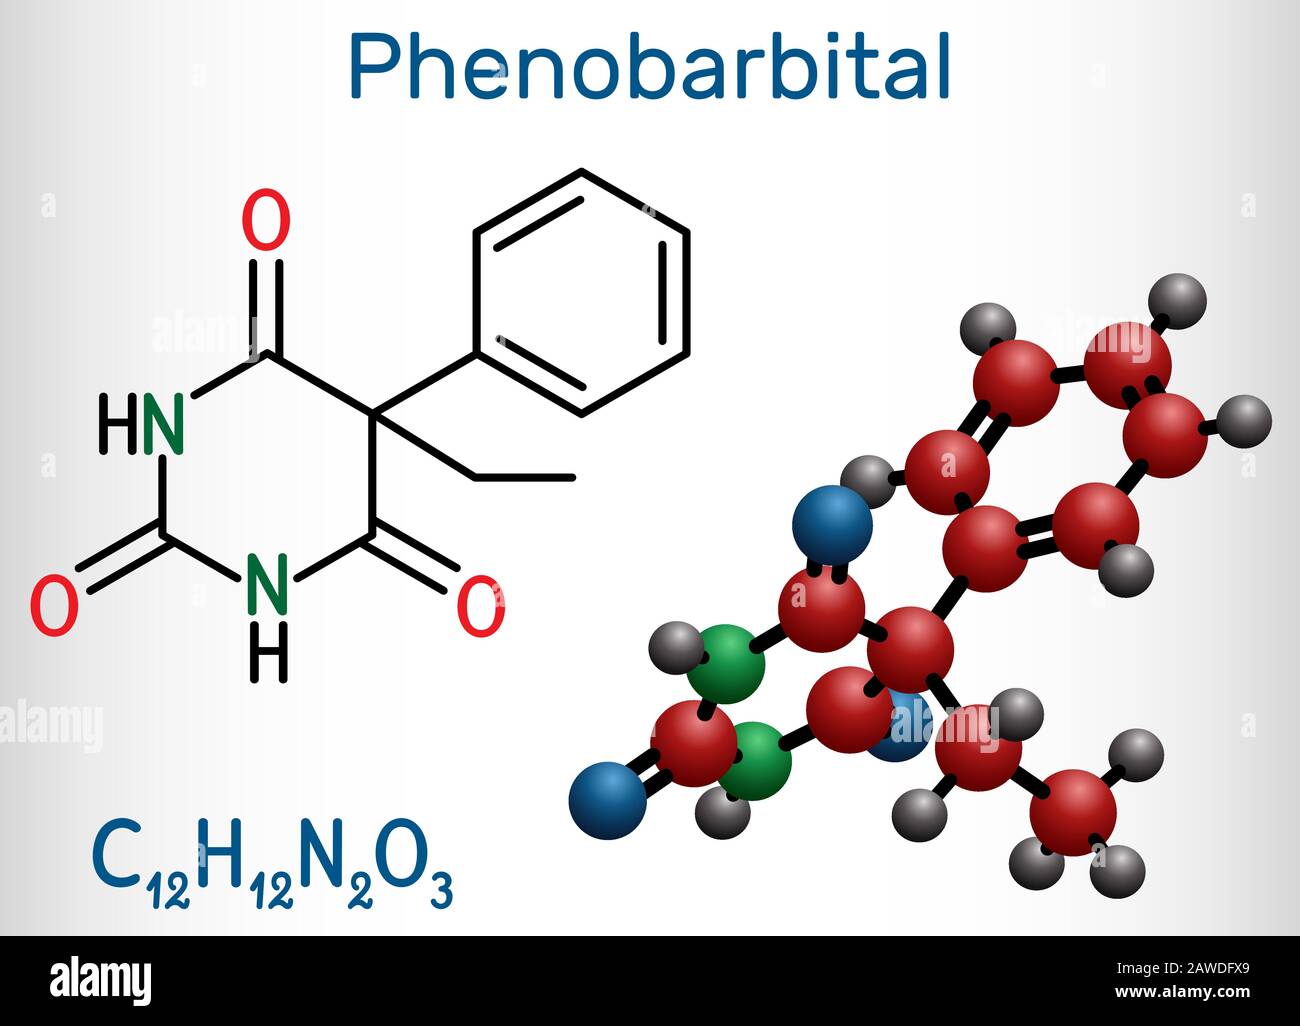 Phenobarbital, phenobarbitone or phenobarb, C12H12N2O3  molecule. It is a medication for the treatment of epilepsy. Structural chemical formula and mo Stock Vector